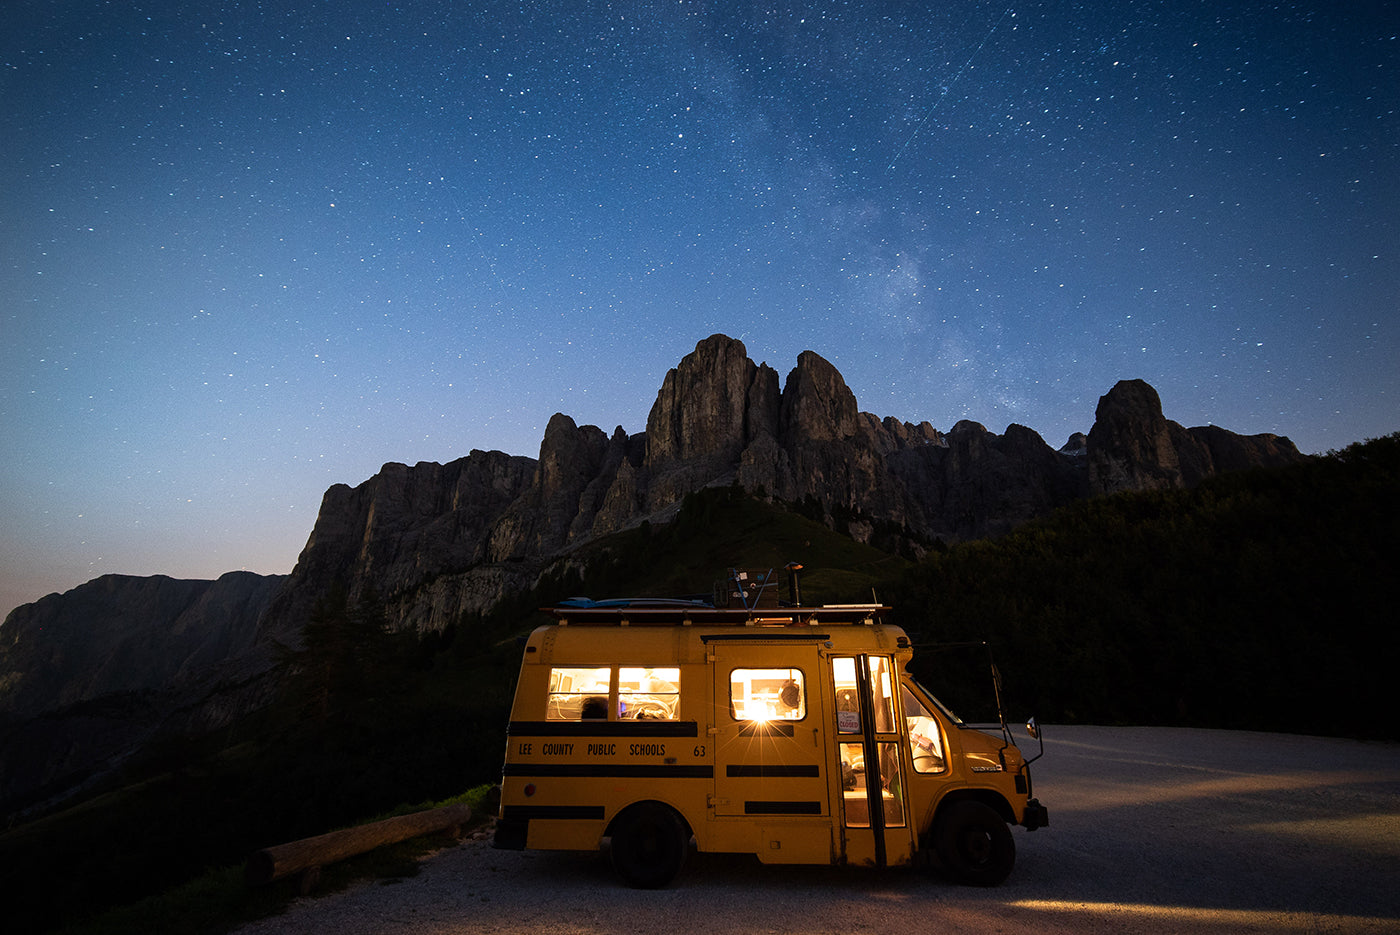 Lit school bus during night time. In the background a chain of mountains. (Photo: Kai Branss)